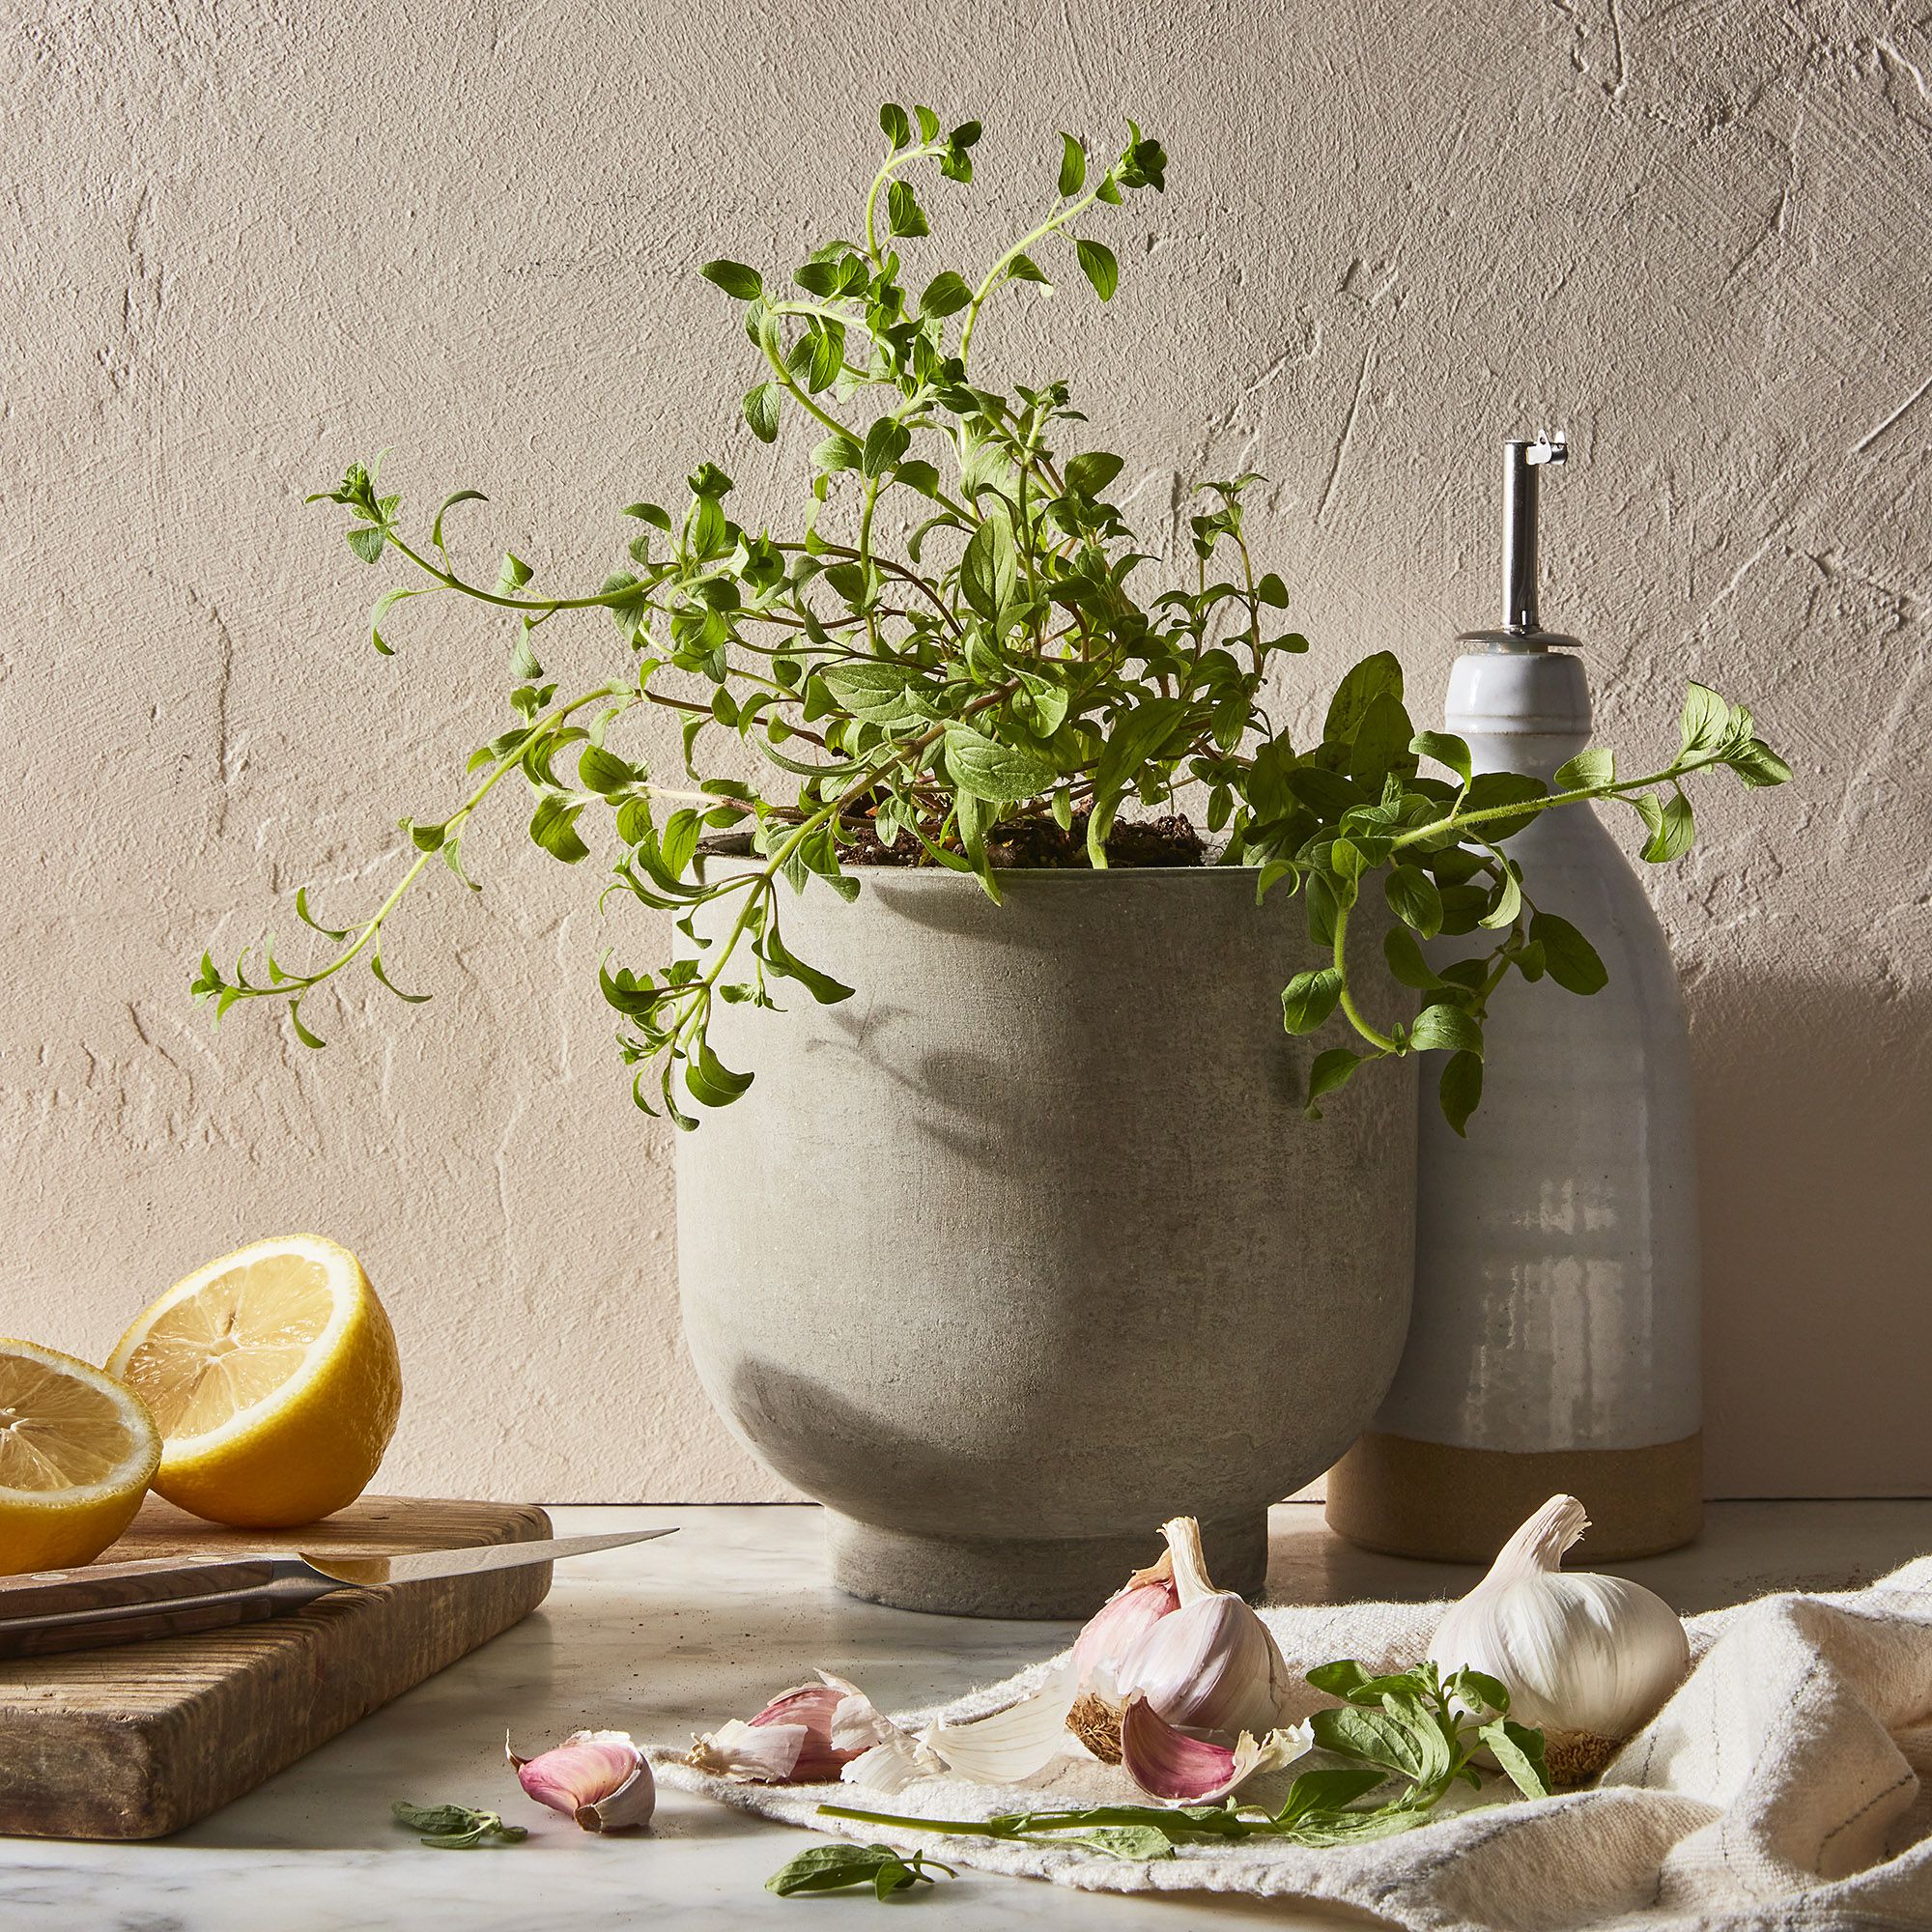 A light beige Hawkins New York plant pot with a plant in it set next to an oil dispenser and behind a cutting board with lemons and garlic on it.